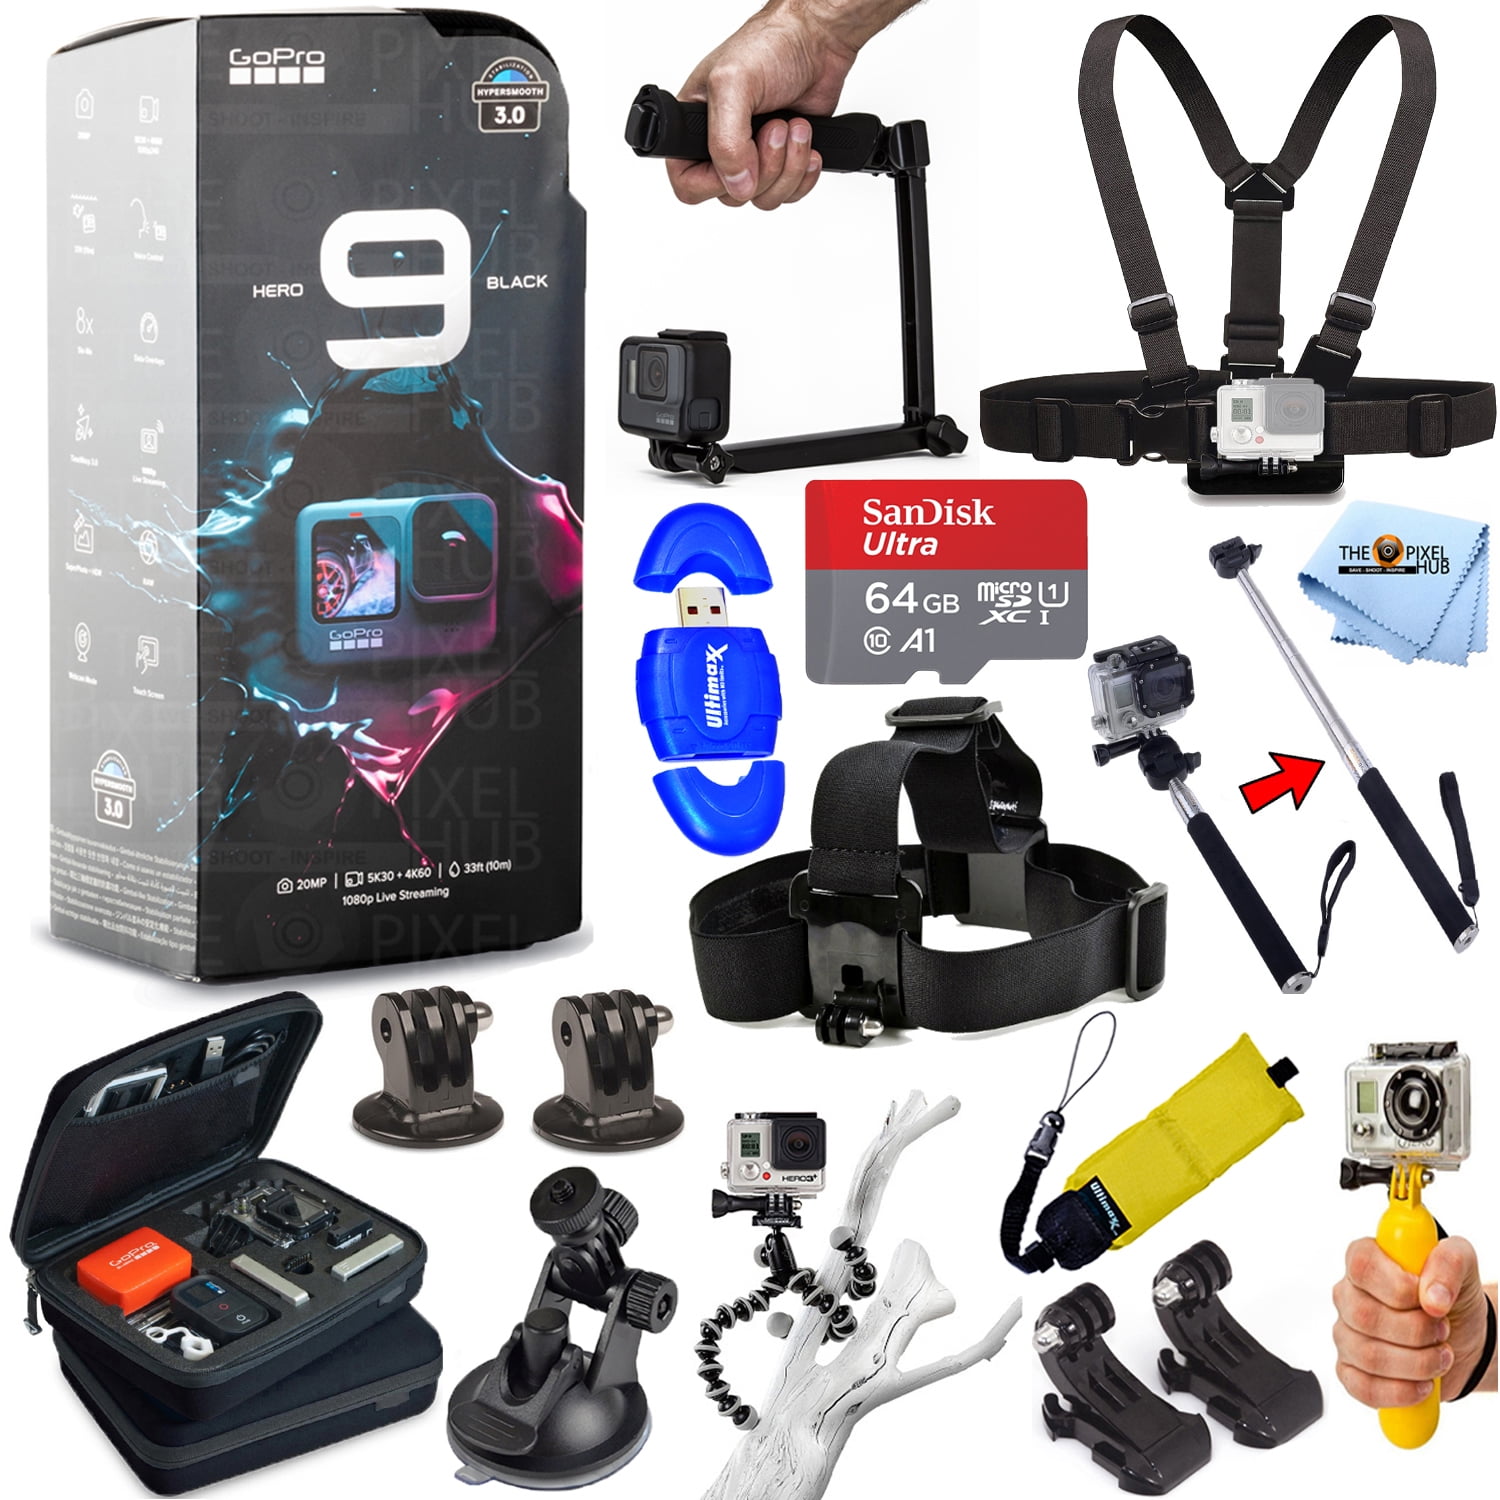 GoPro HERO9 Black Waterproof 4K All In 1 PRO KIT with 64GB, 3-Way Tripod, Medium Case, Head and Chest Strap, Stick and Much More - Walmart.com